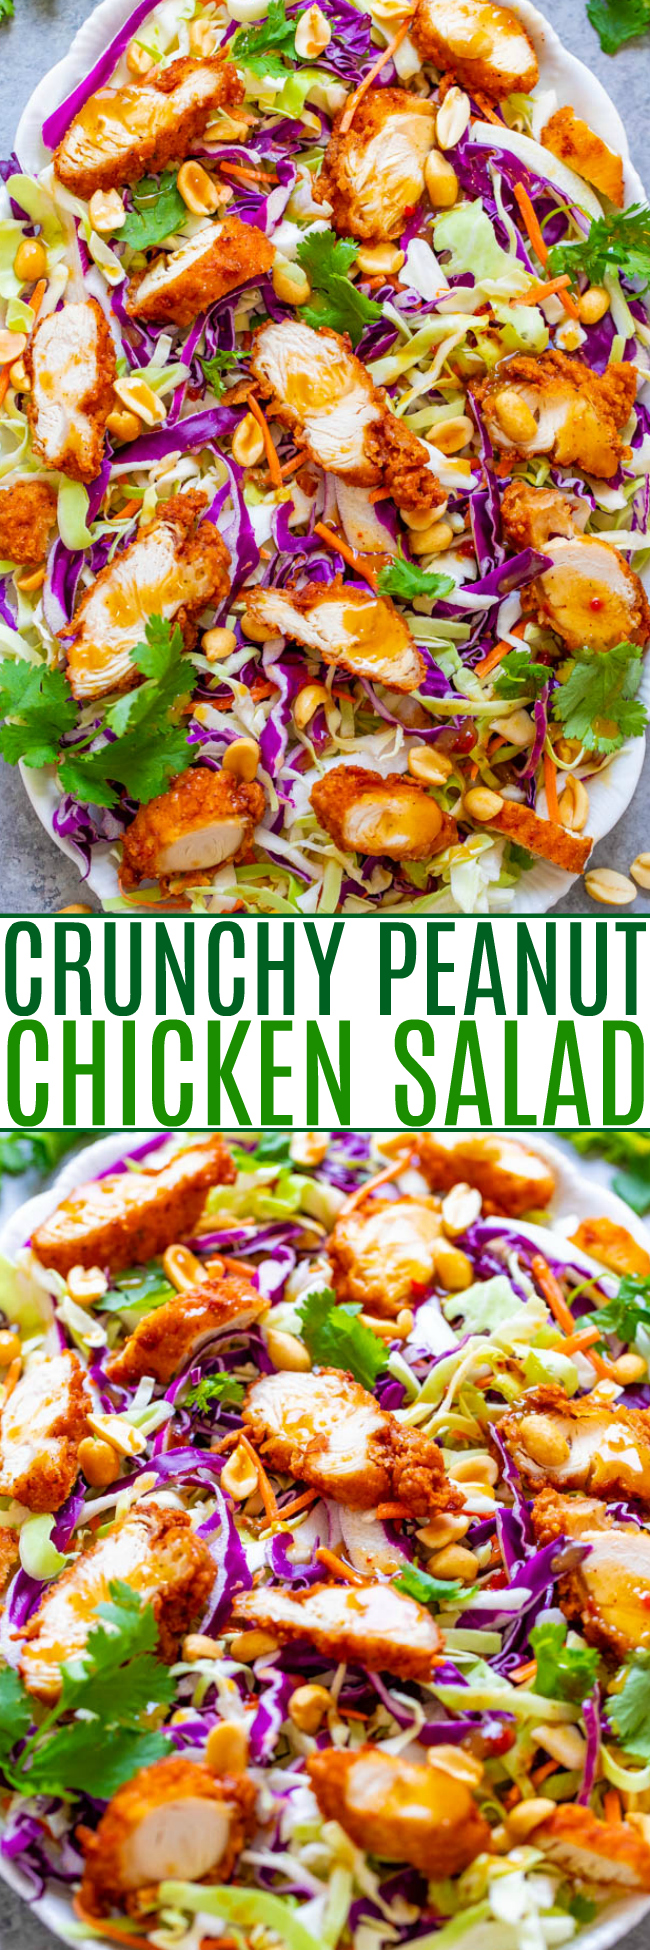 Crunchy Peanut Salad with Chicken — Crispy fried chicken with crunchy cabbage, carrots, peanuts, cilantro and the EASIEST and BEST homemade peanut sauce that coats every bite!! A salad that you'll CRAVE over and over!! 